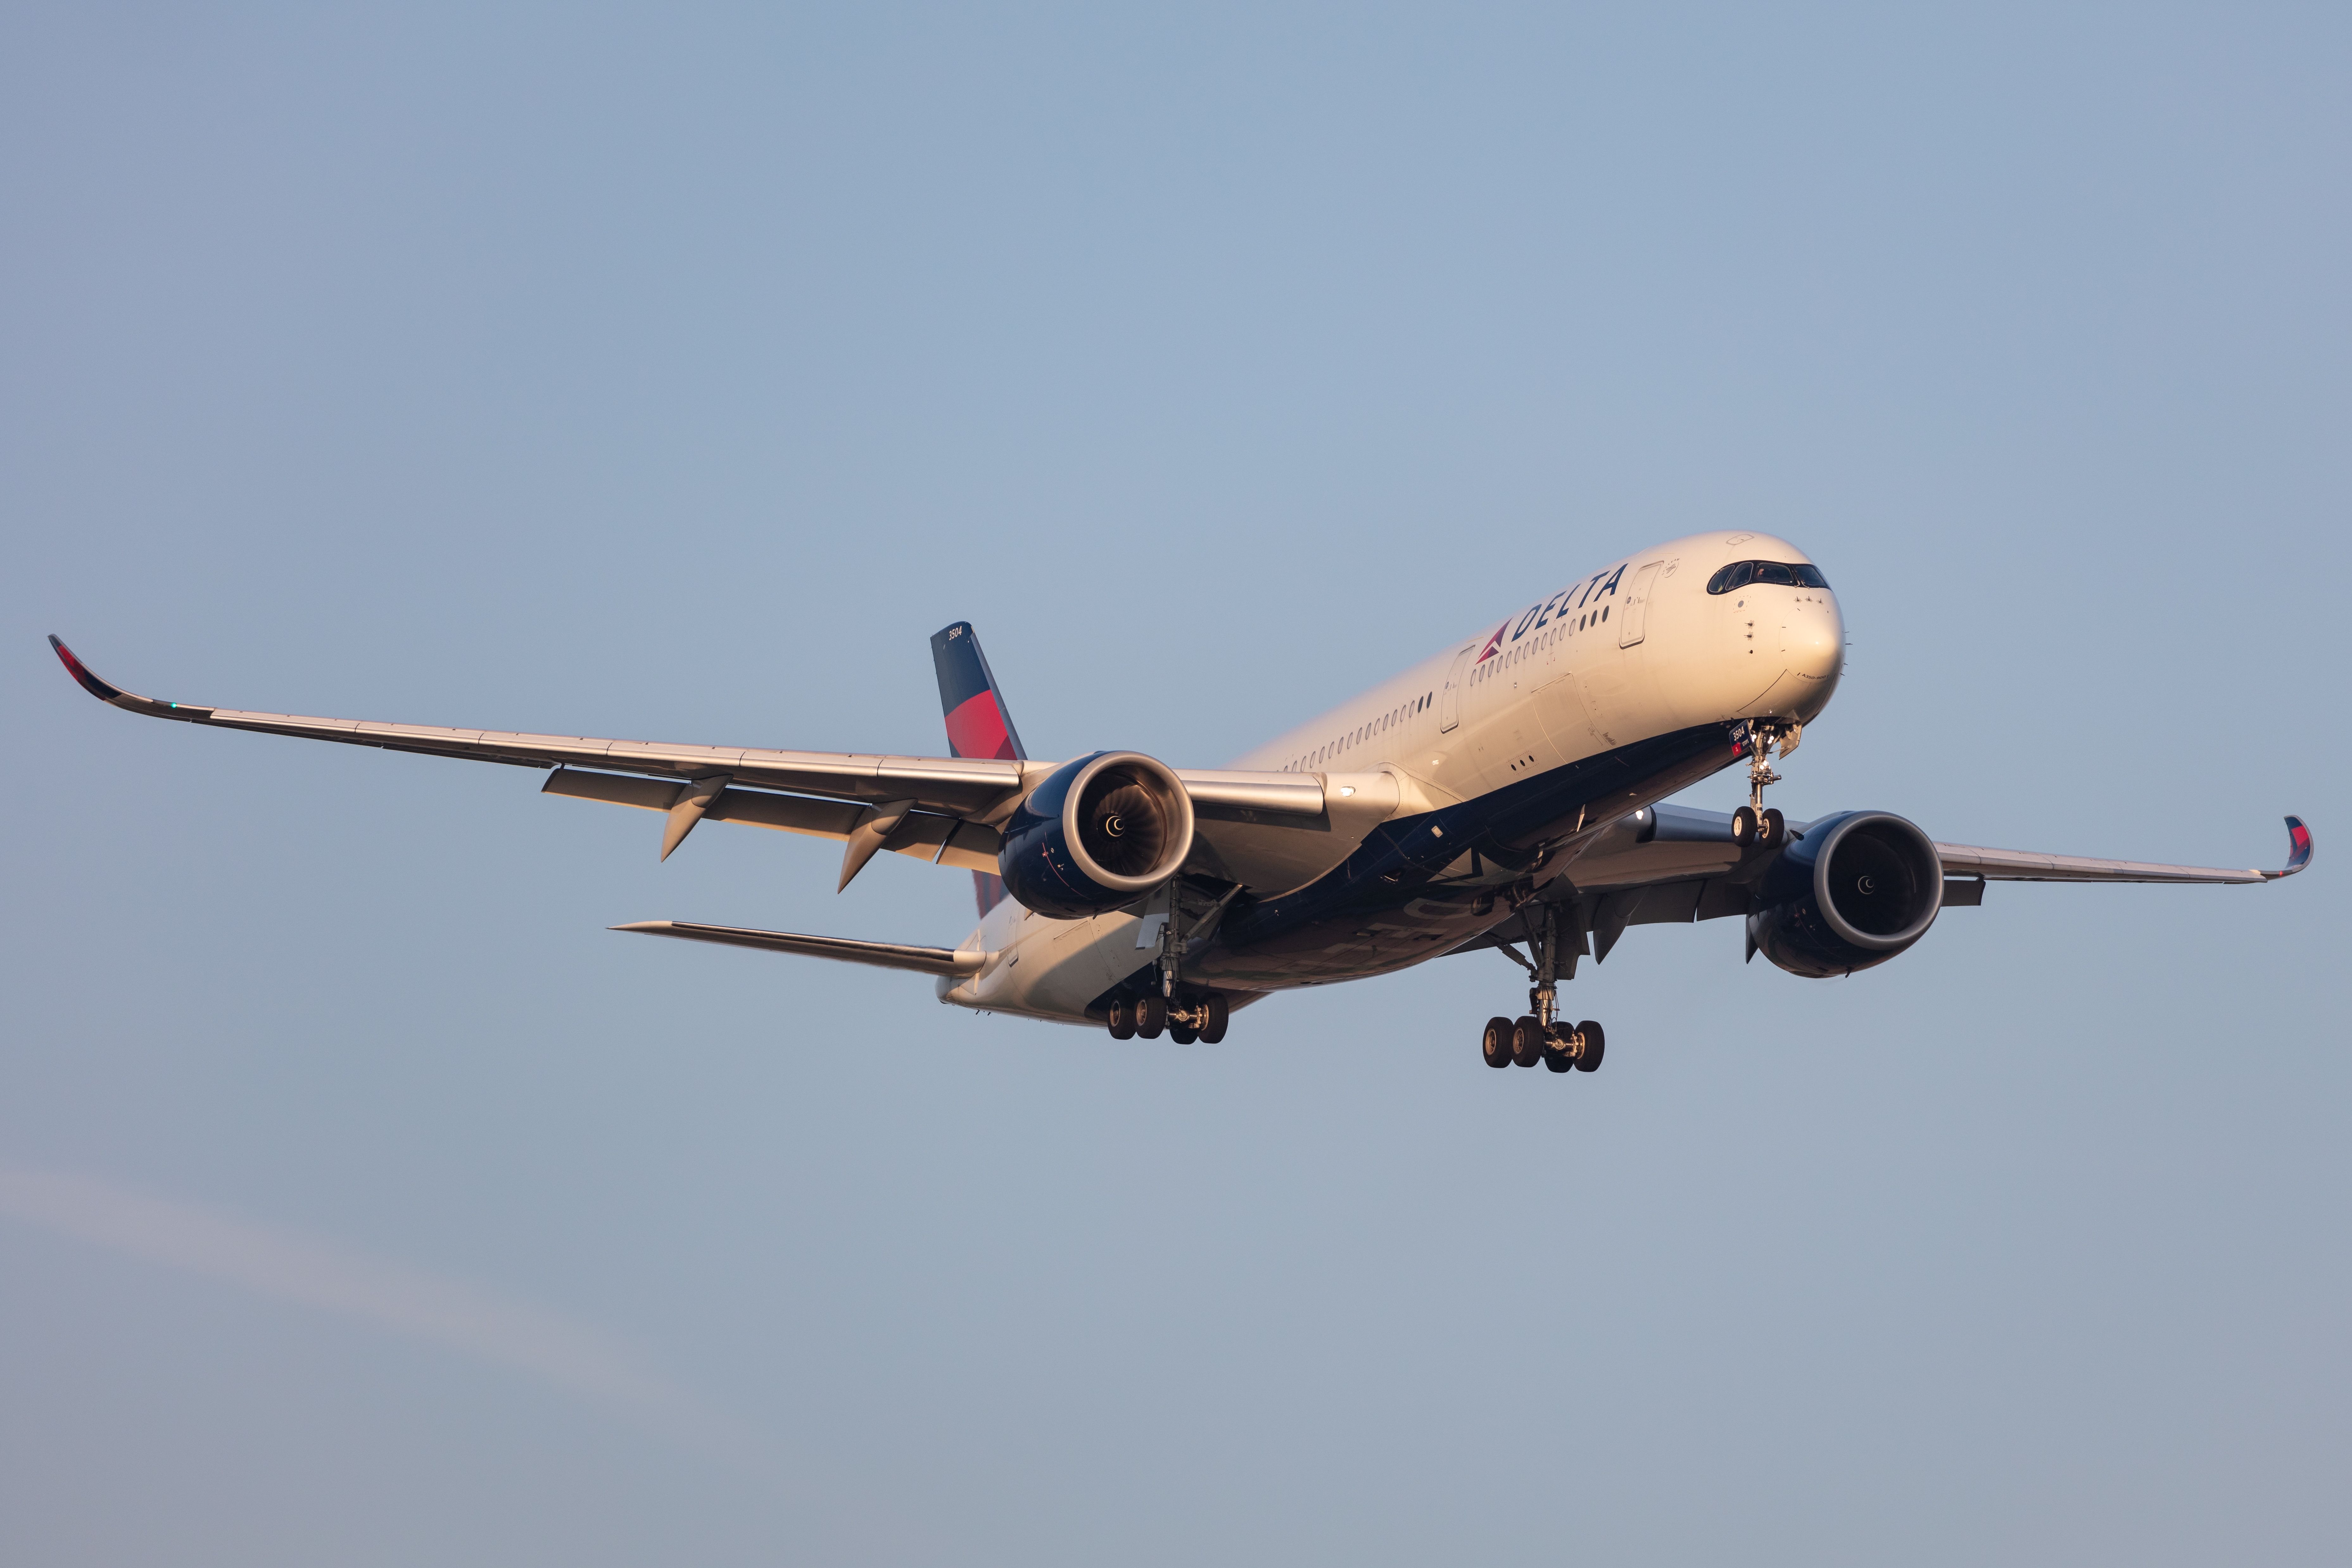 Delta Air Lines Airbus A350-941 landing at Amsterdam Schiphol Airport.